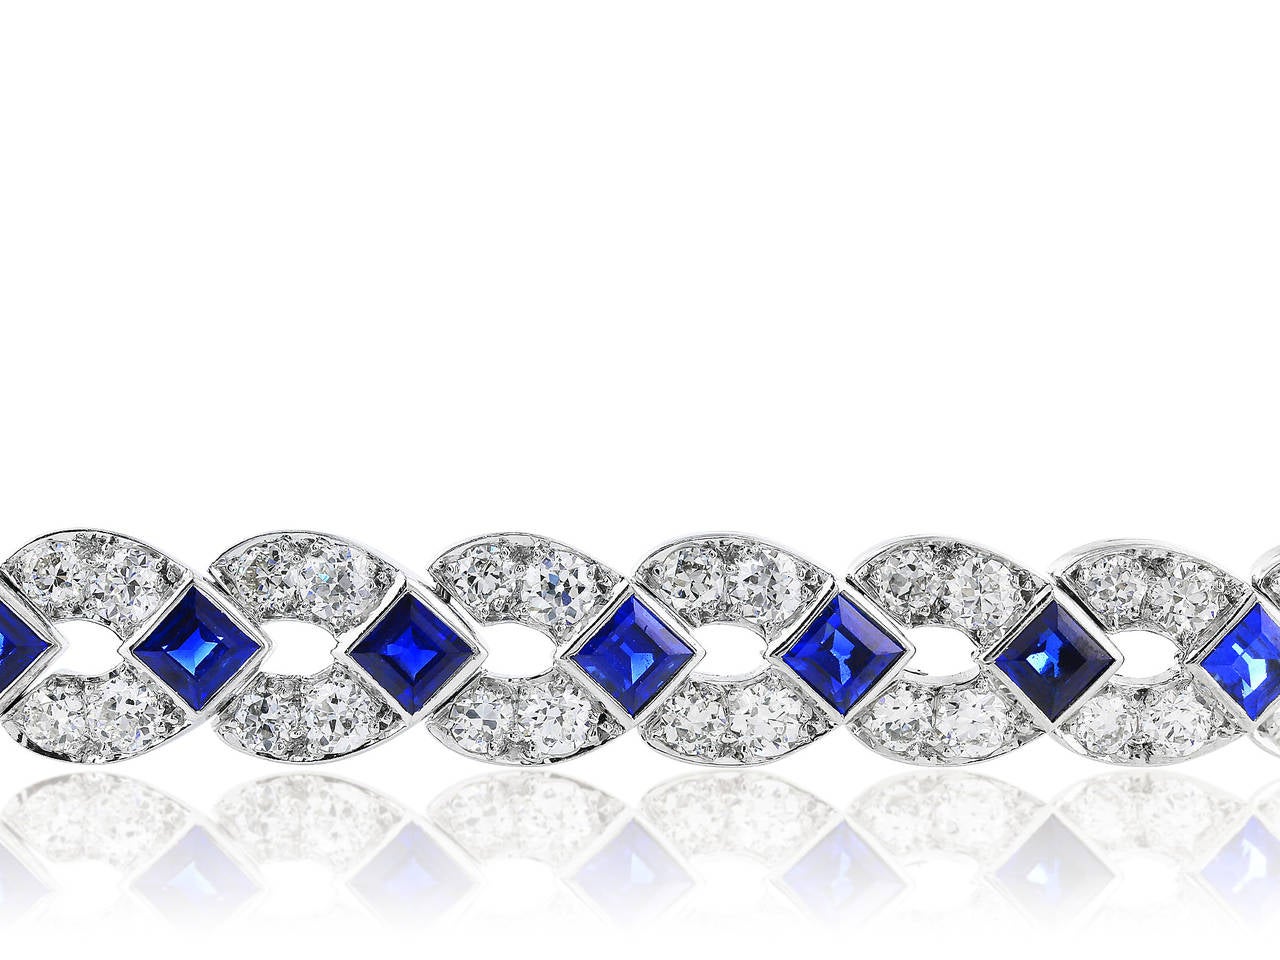 Platinum Art Deco bracelet consisting of approximately 10.25 carats total weight of Old European Cut Diamonds set with approximately 10.00 carats total weight of Square Cut Sapphires.